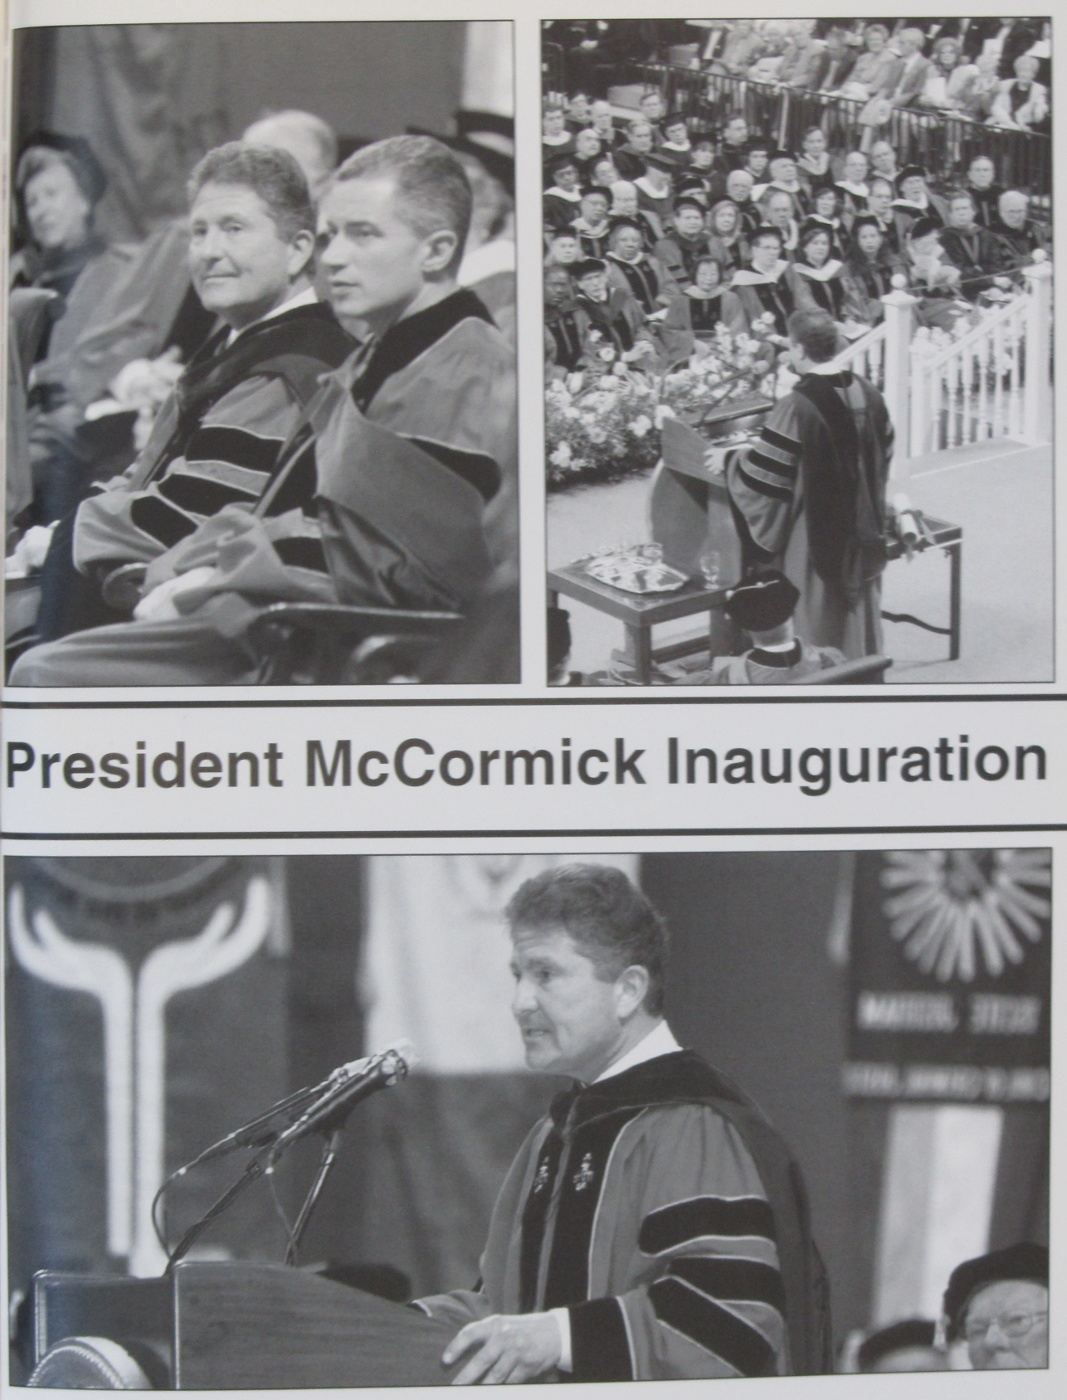 2003 President McCormick Inauguration - WRSU covered the event.